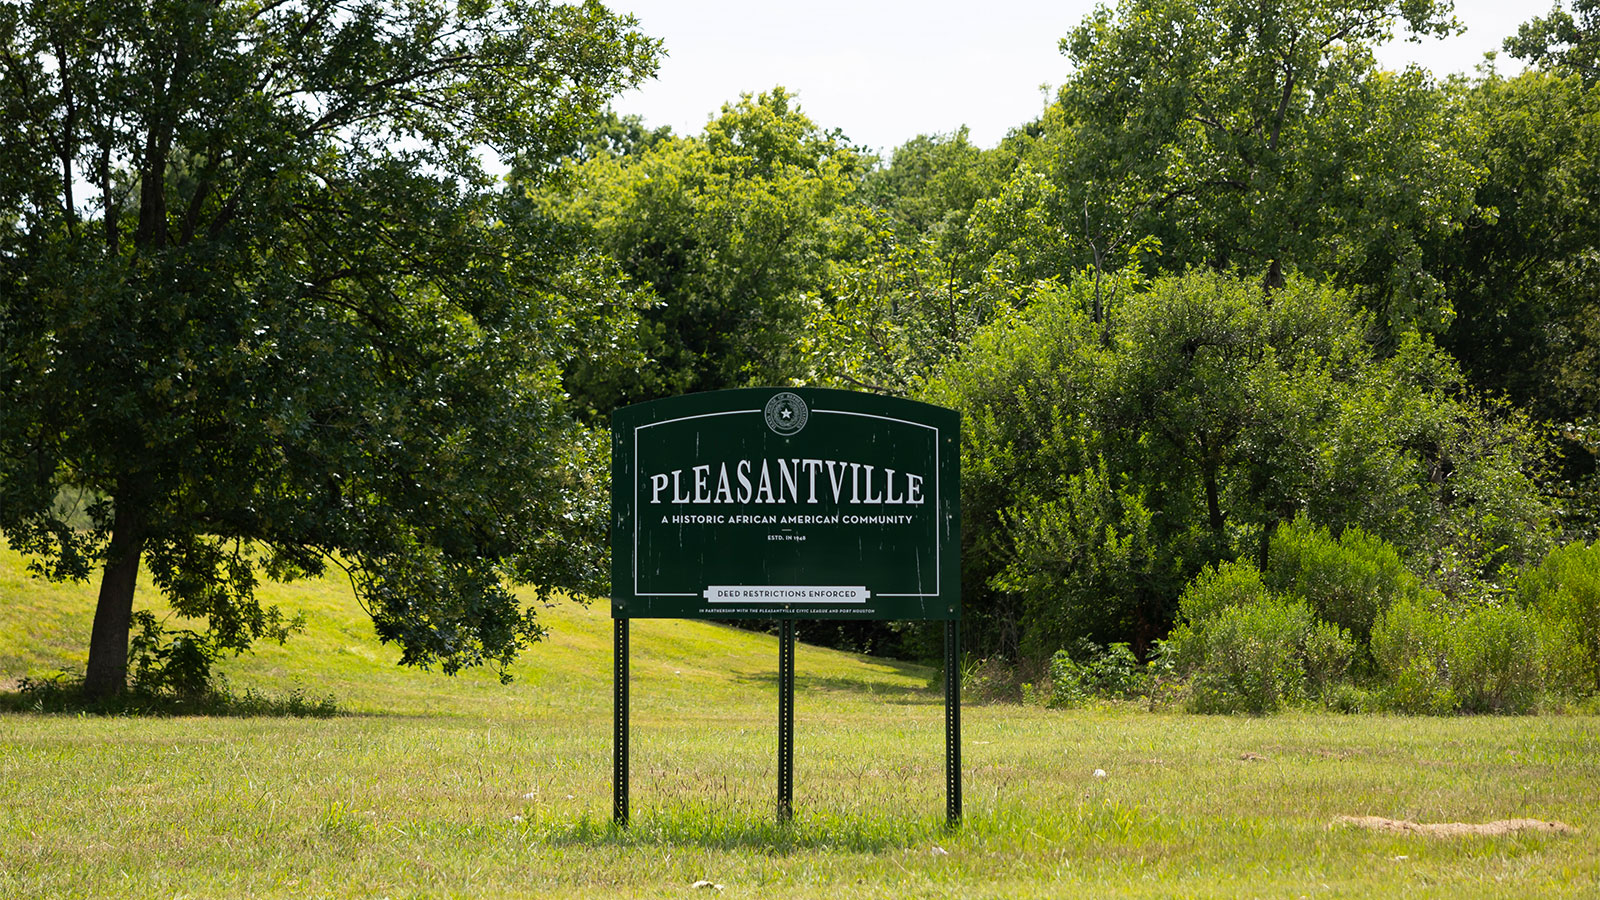 a sign that reads "Pleasantville, a historic African-American community" in a grass field with trees in the background